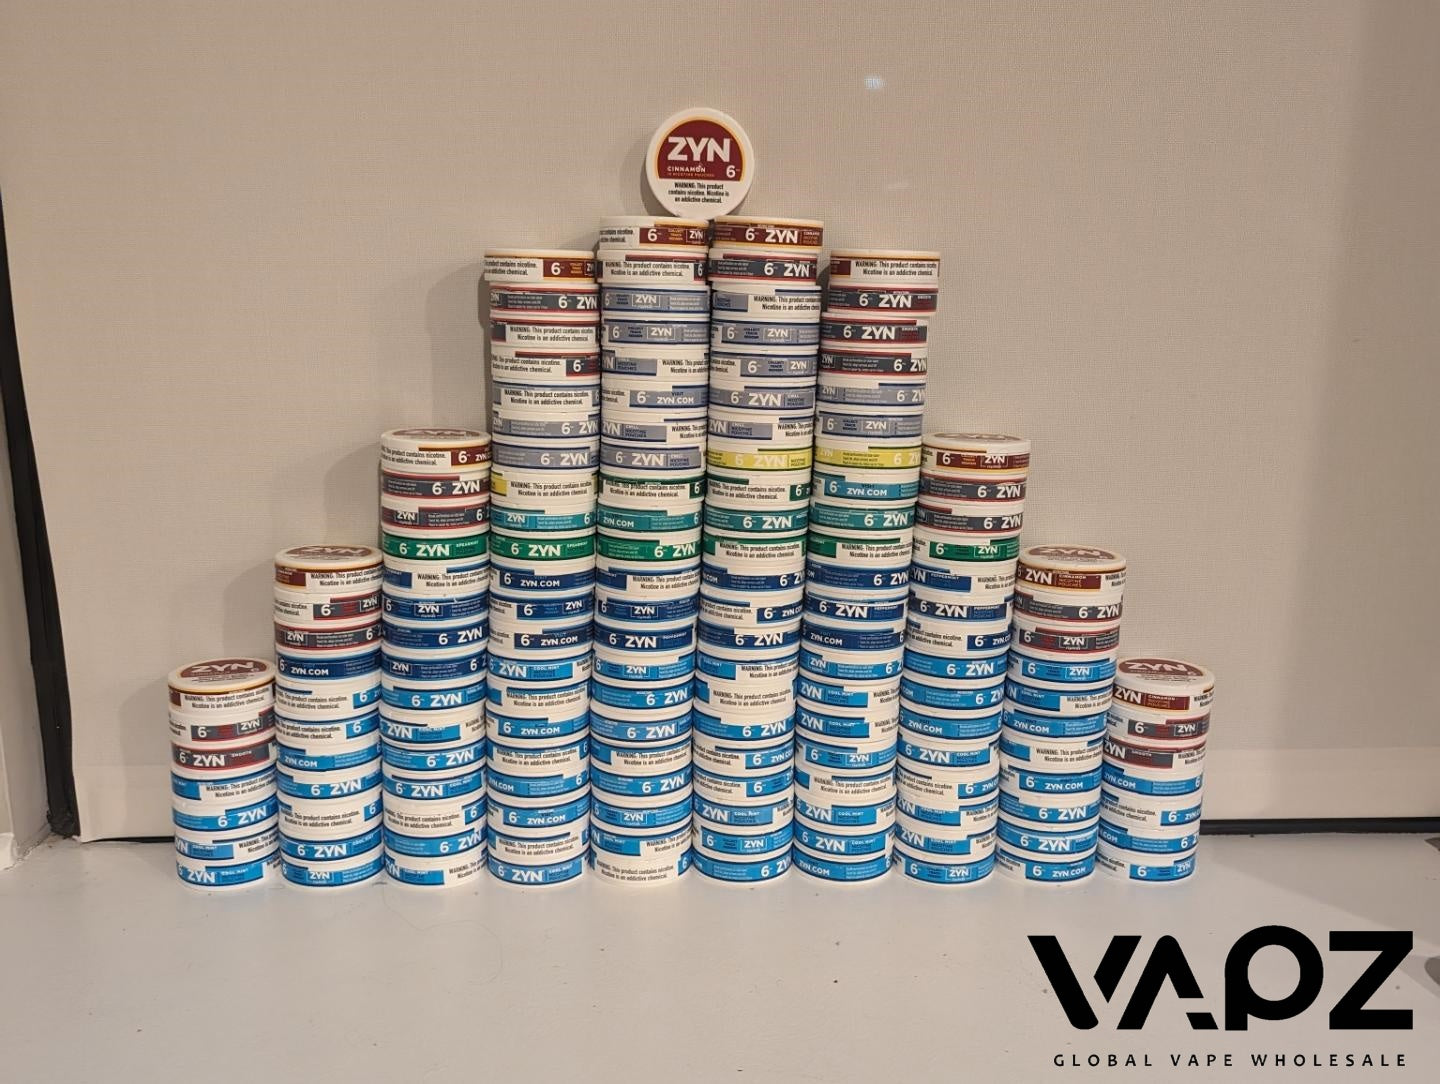 Snus vs. Zyn: What Are the Major Differences